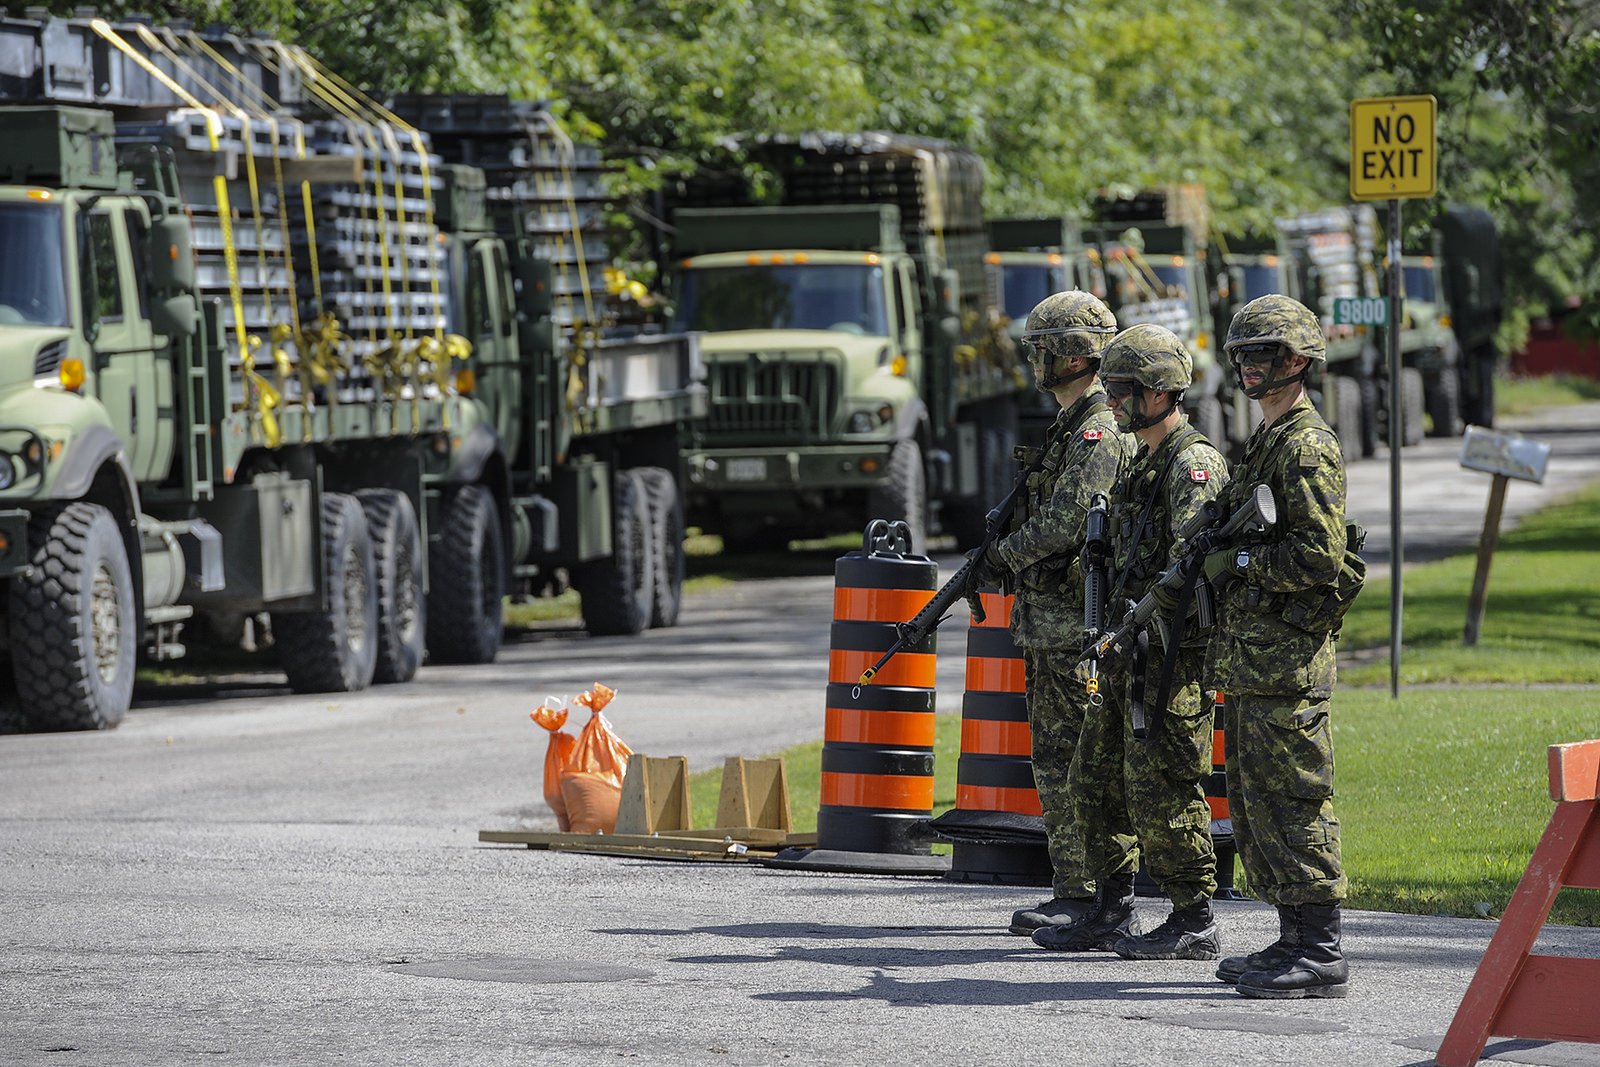 Image of Canadian Army Trucks lined up